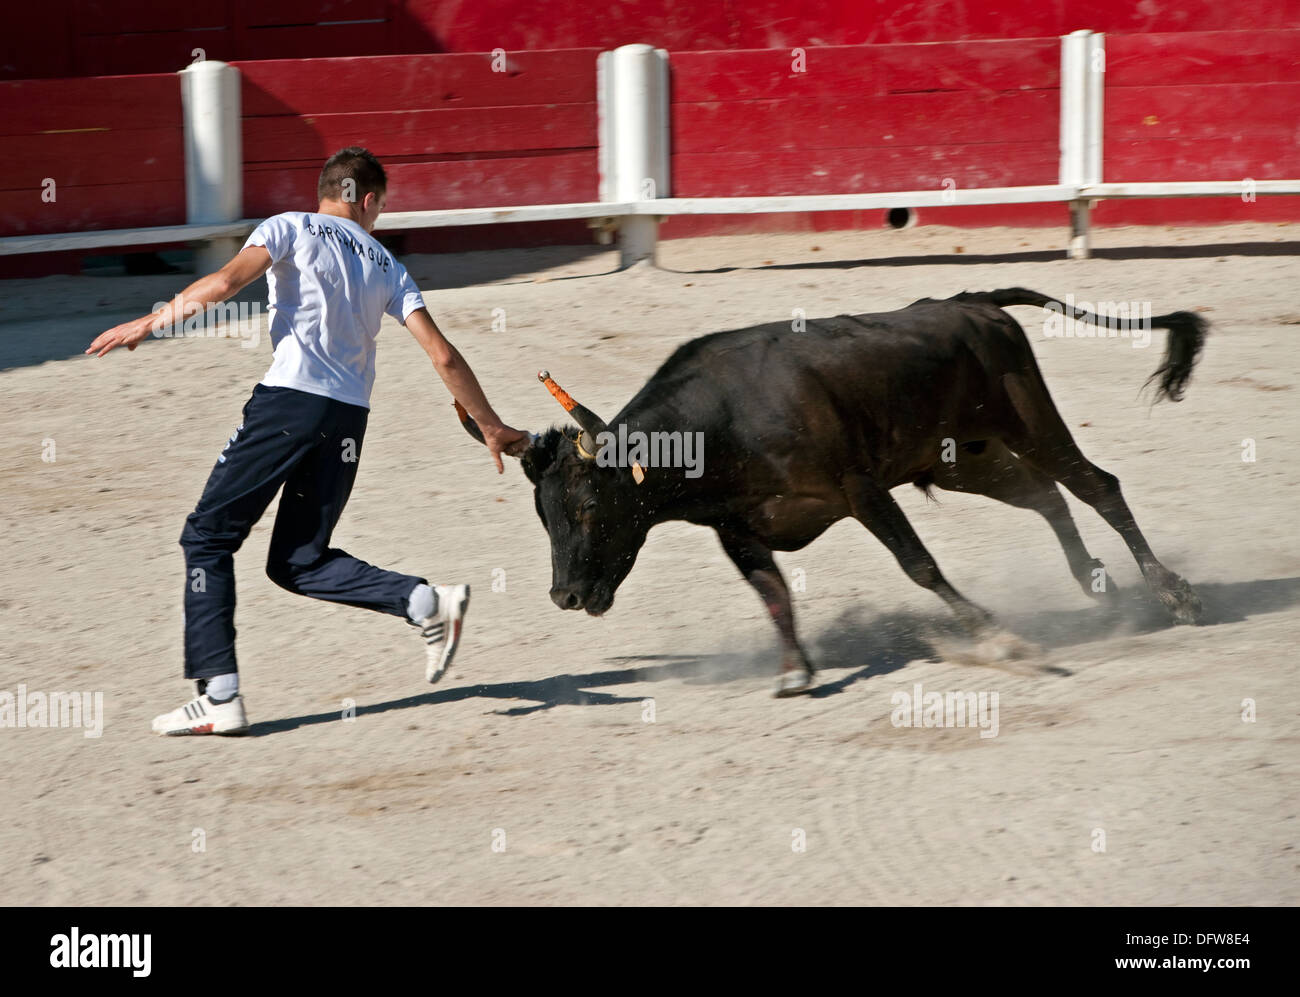 French bull fighting,Course Camarguaise,Bullfighting, Fontvieille France,Bull fighter and bull,at full charge, David Collingwood Stock Photo